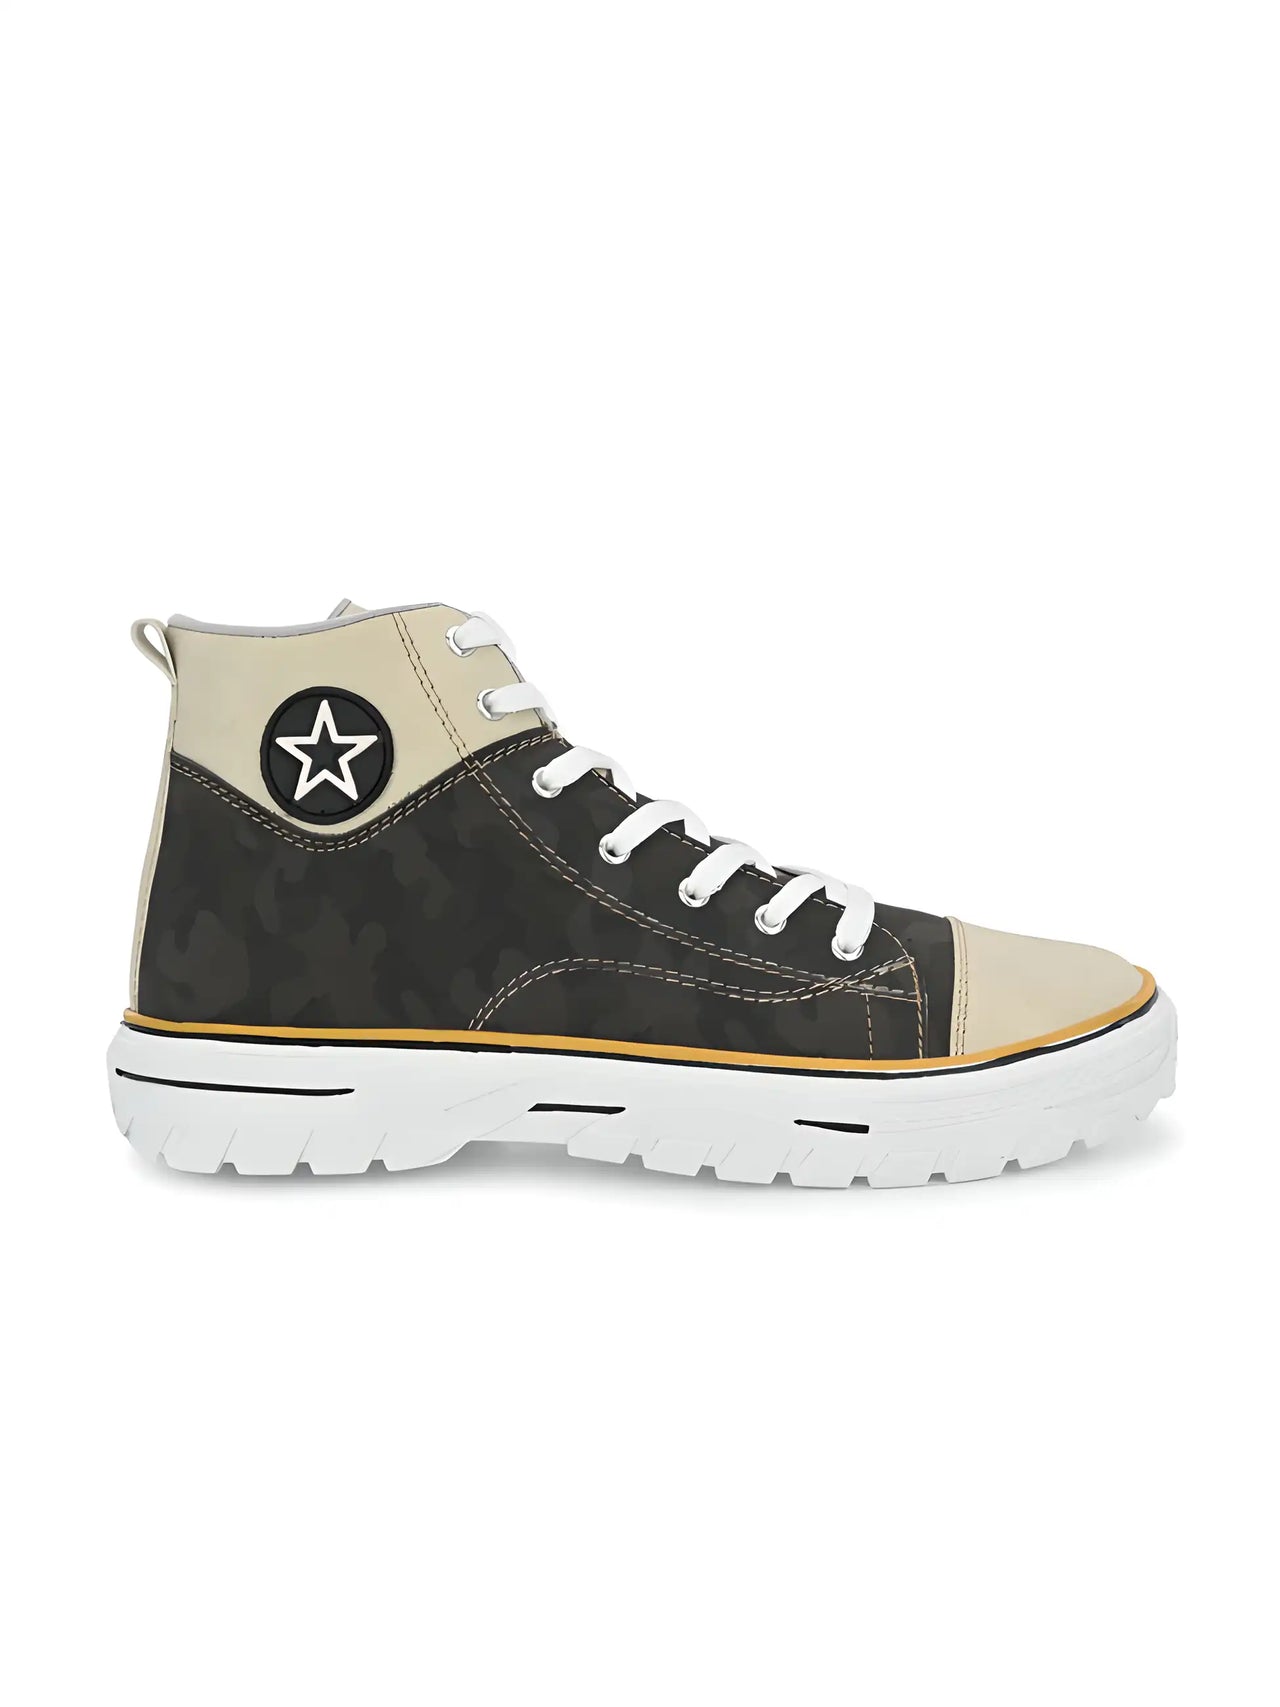 Bucik Men Yellow Synthetic Leather Lace-Up
Boots